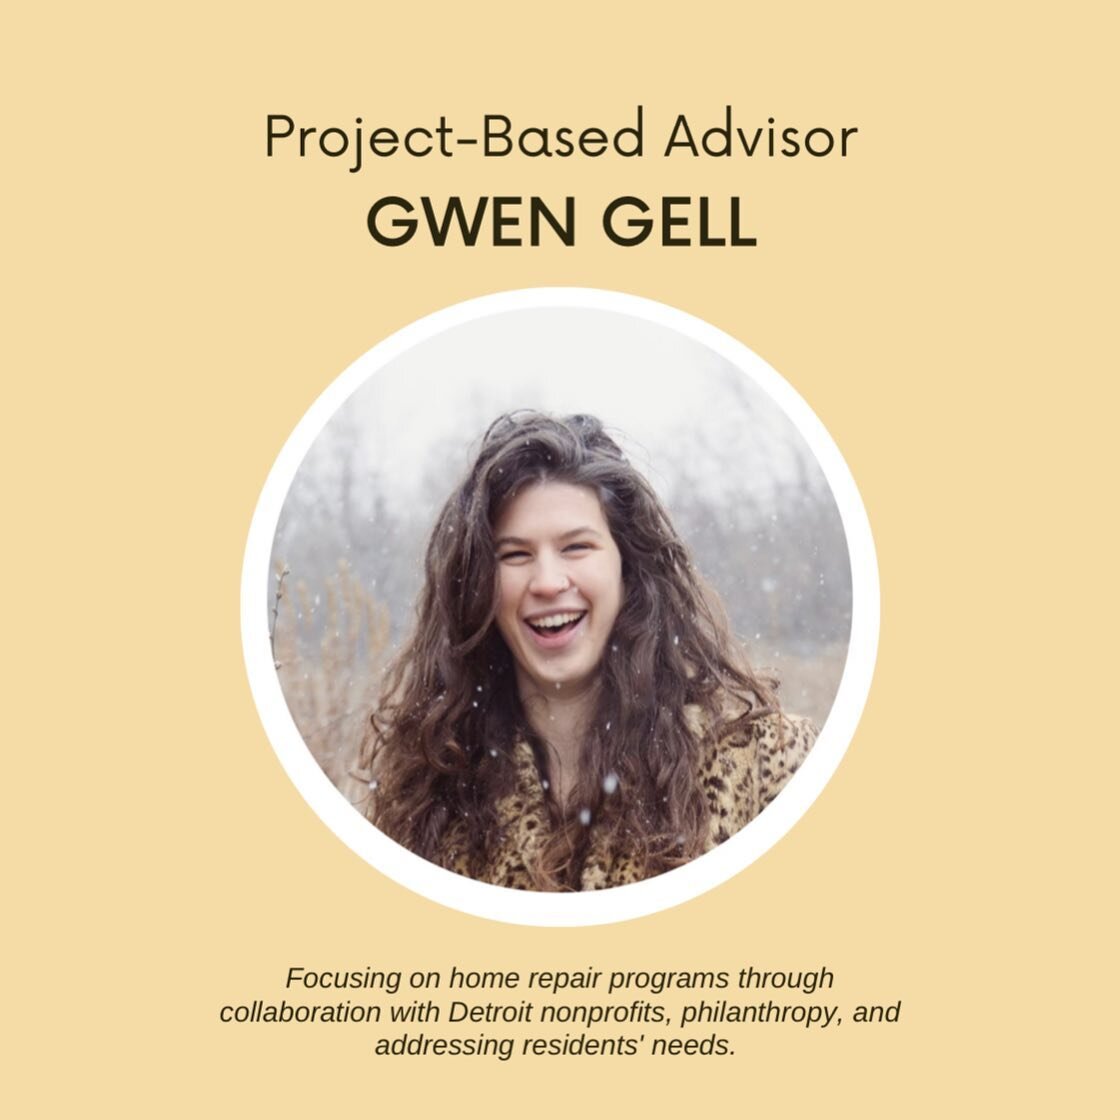 Gwen is a loving strategist driven by experience, curiosity, and humanity. She&rsquo;s seen CityShares come to fruition over the past three years, as she assisted on some of our earliest design projects. Gwen is an excellent thought partner and desig